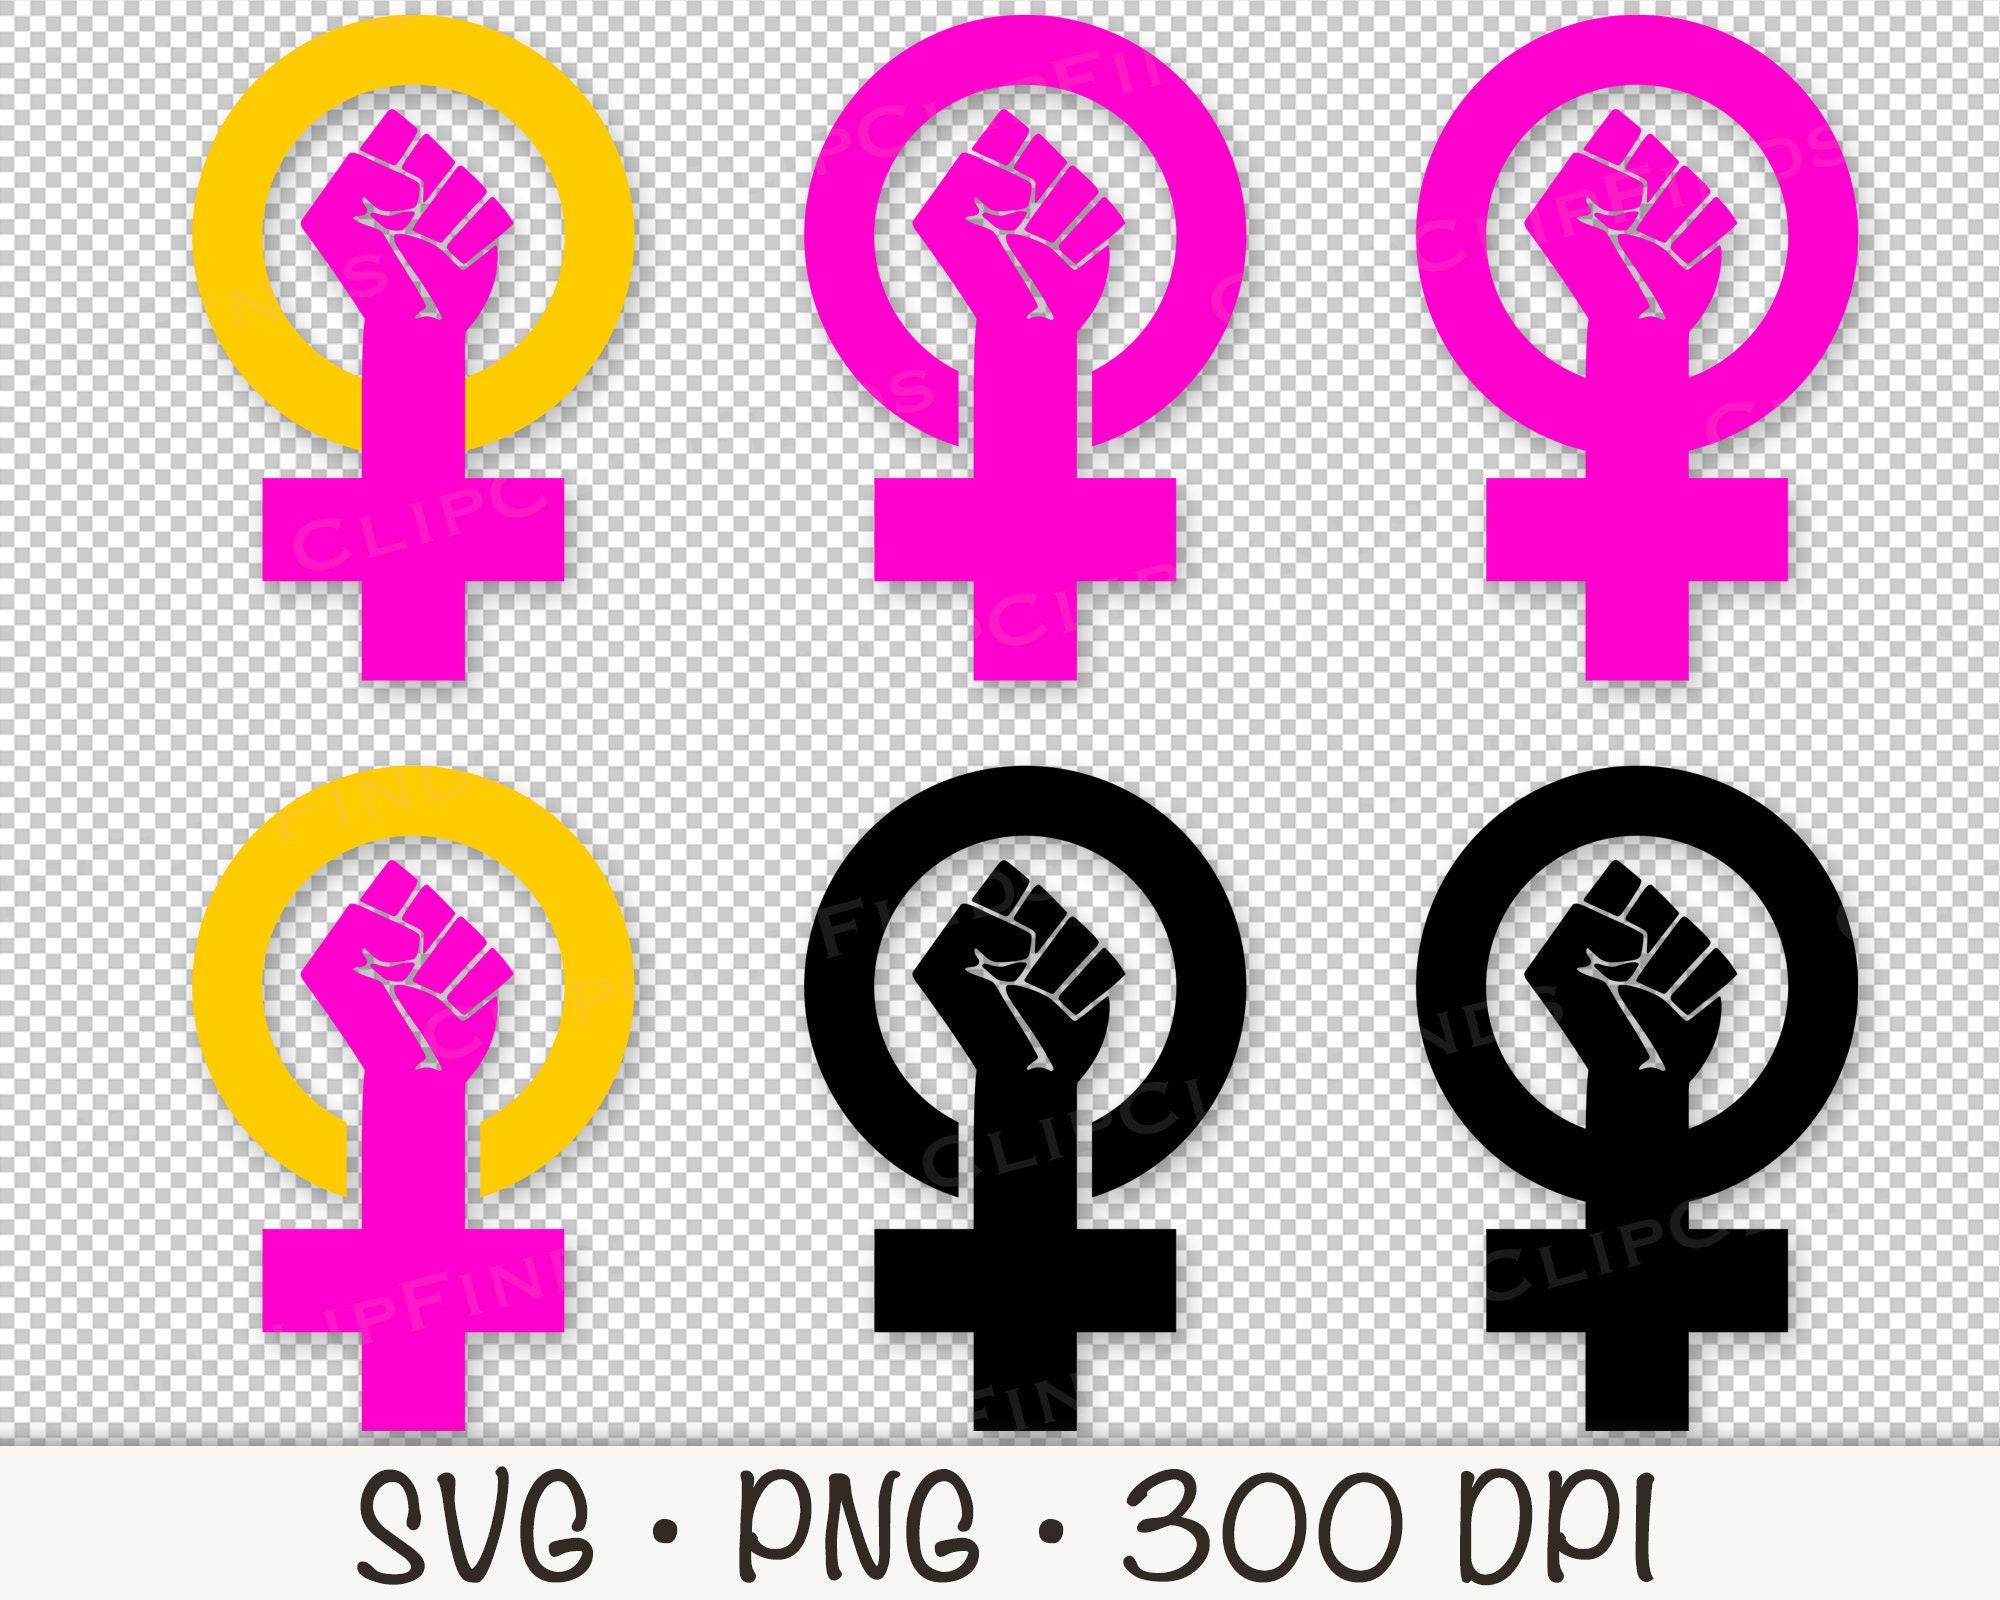 Feminist Female Empowerment Symbol Girl Power Fist Pink Sign Feminism Woman  Women Rights Matricentric Empowering Equality Justice Freedom Cool Wall